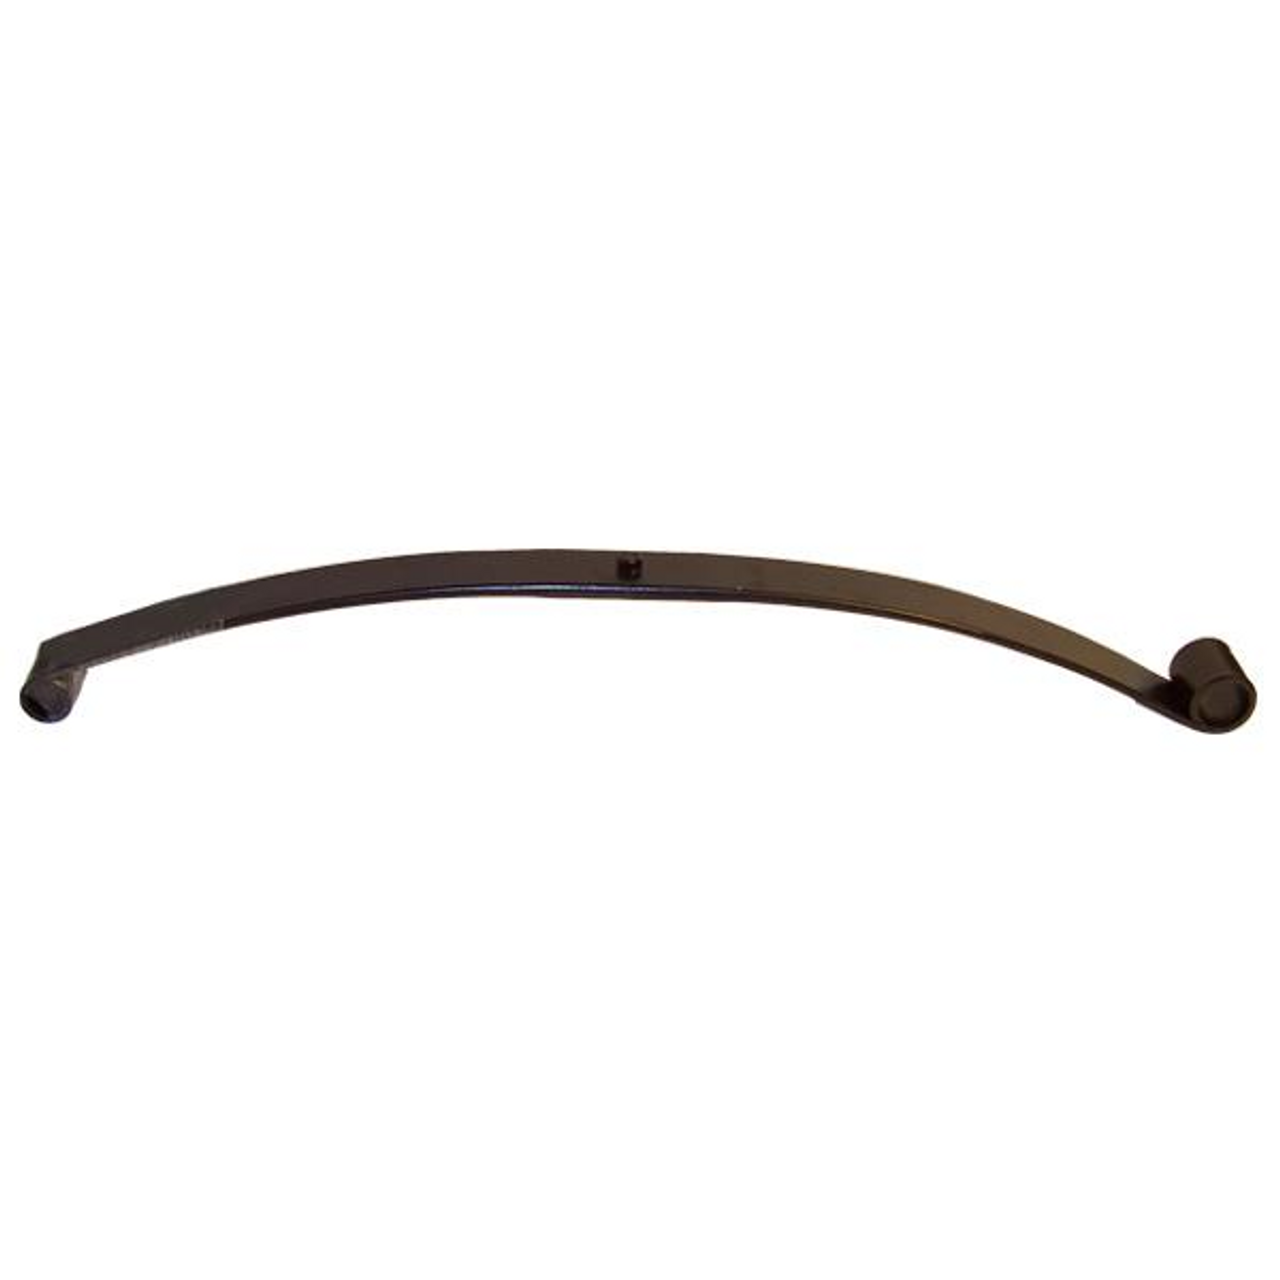 E-Z-GO RXV Rear Leaf Spring (Years 2008-Up), 50506